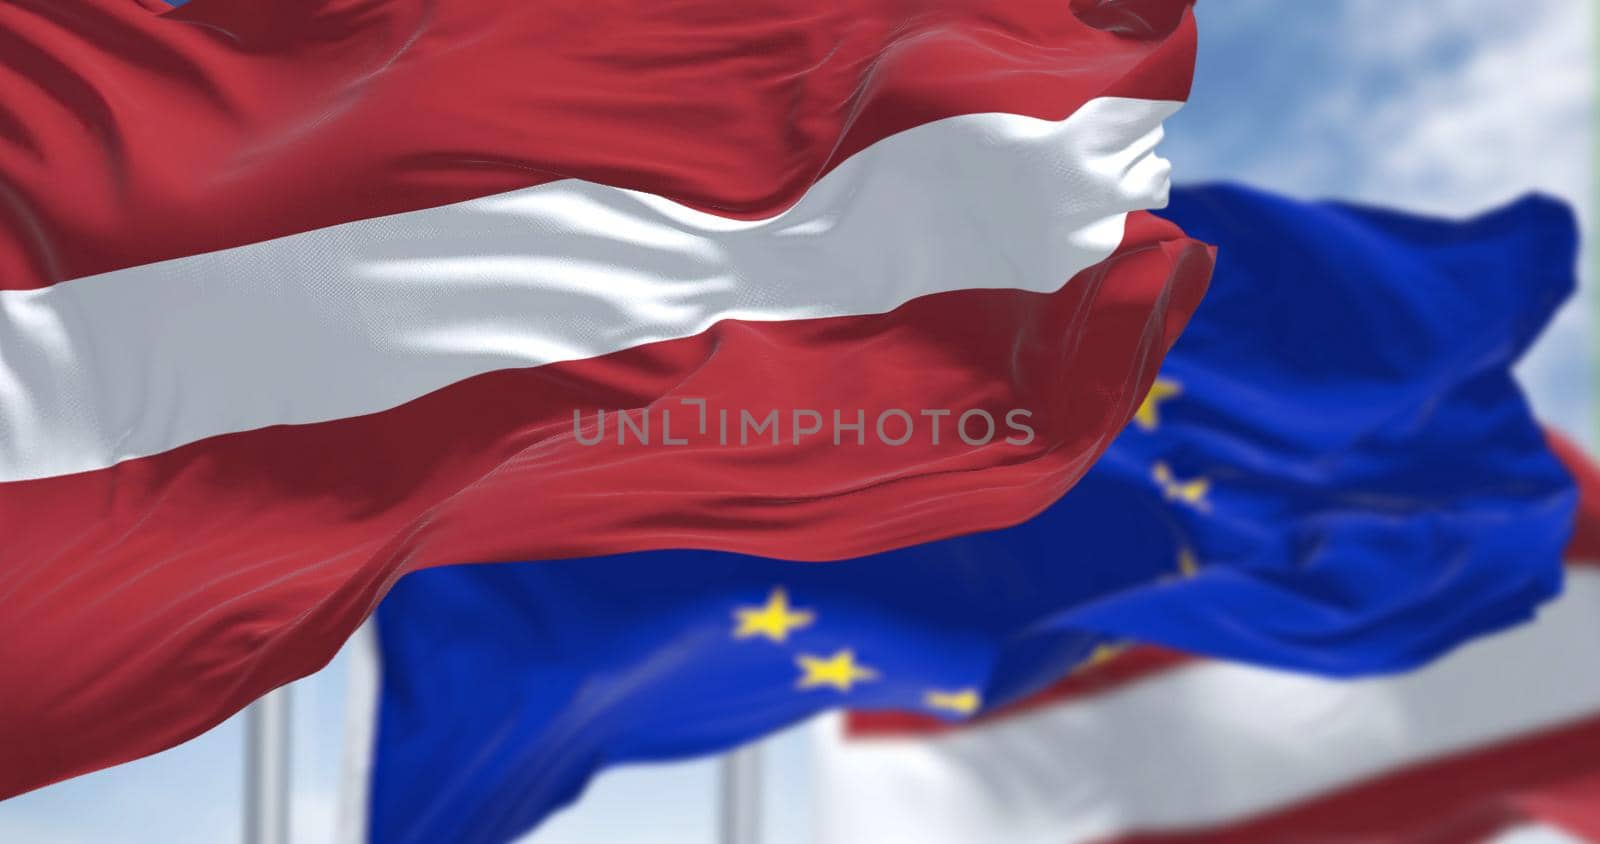 Detail of the national flag of Latvia waving in the wind with blurred european union flag in the background by rarrarorro